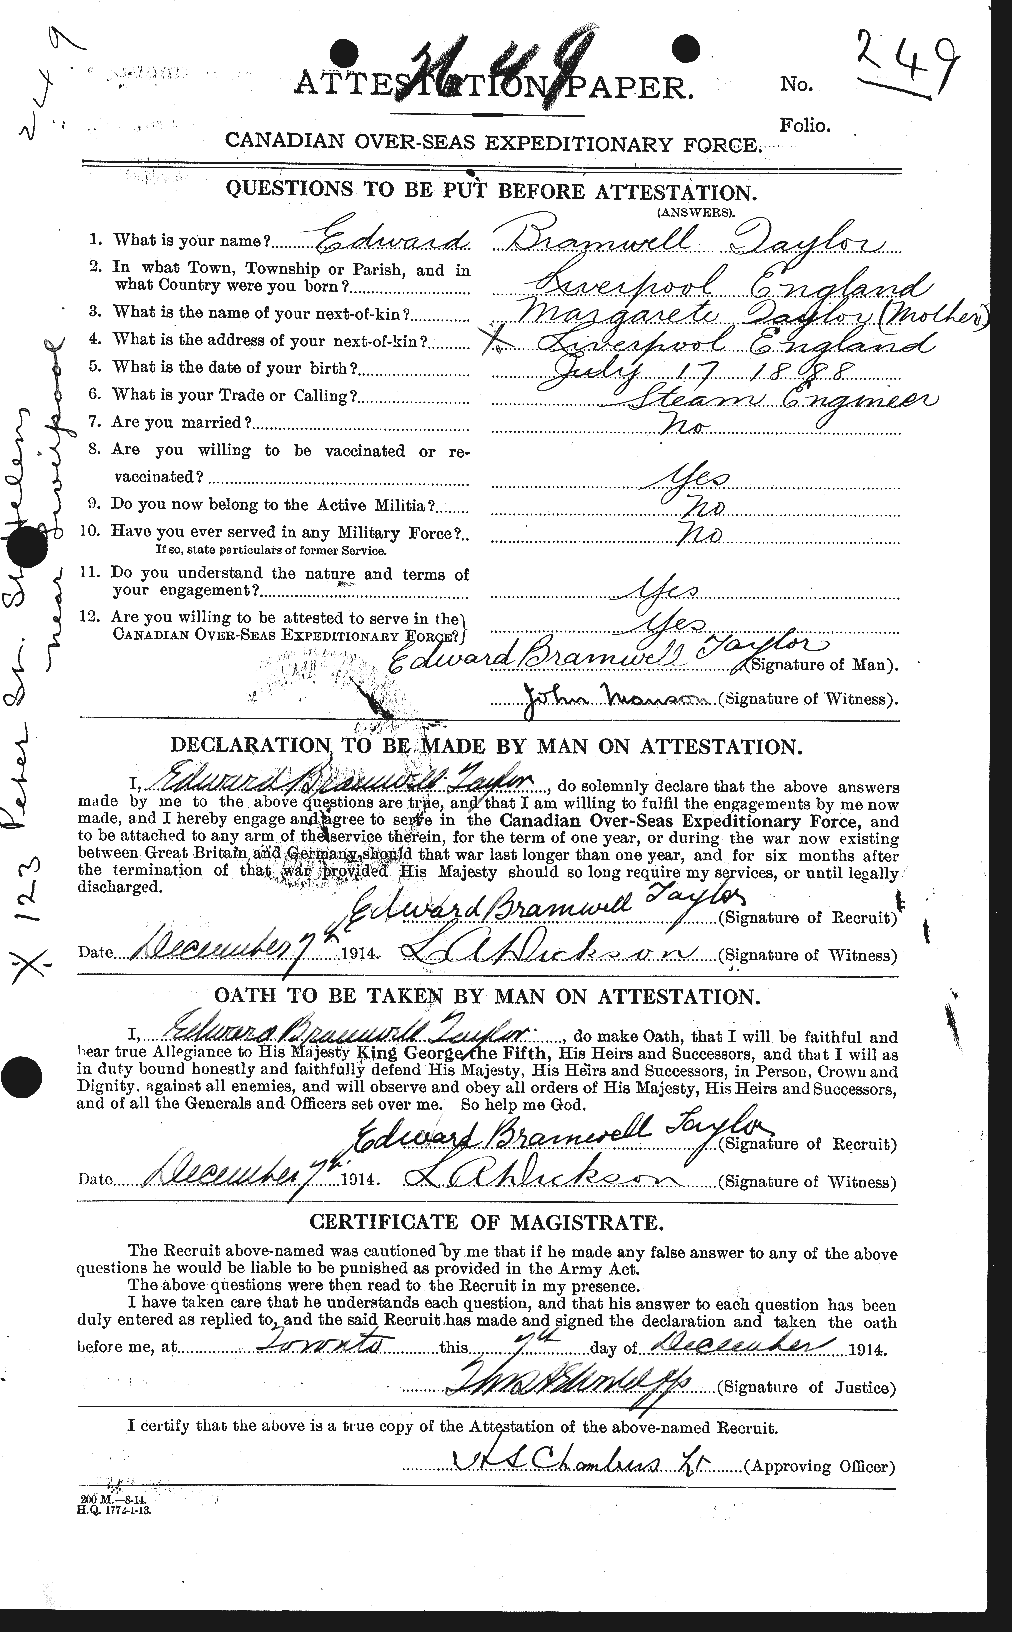 Personnel Records of the First World War - CEF 627304a